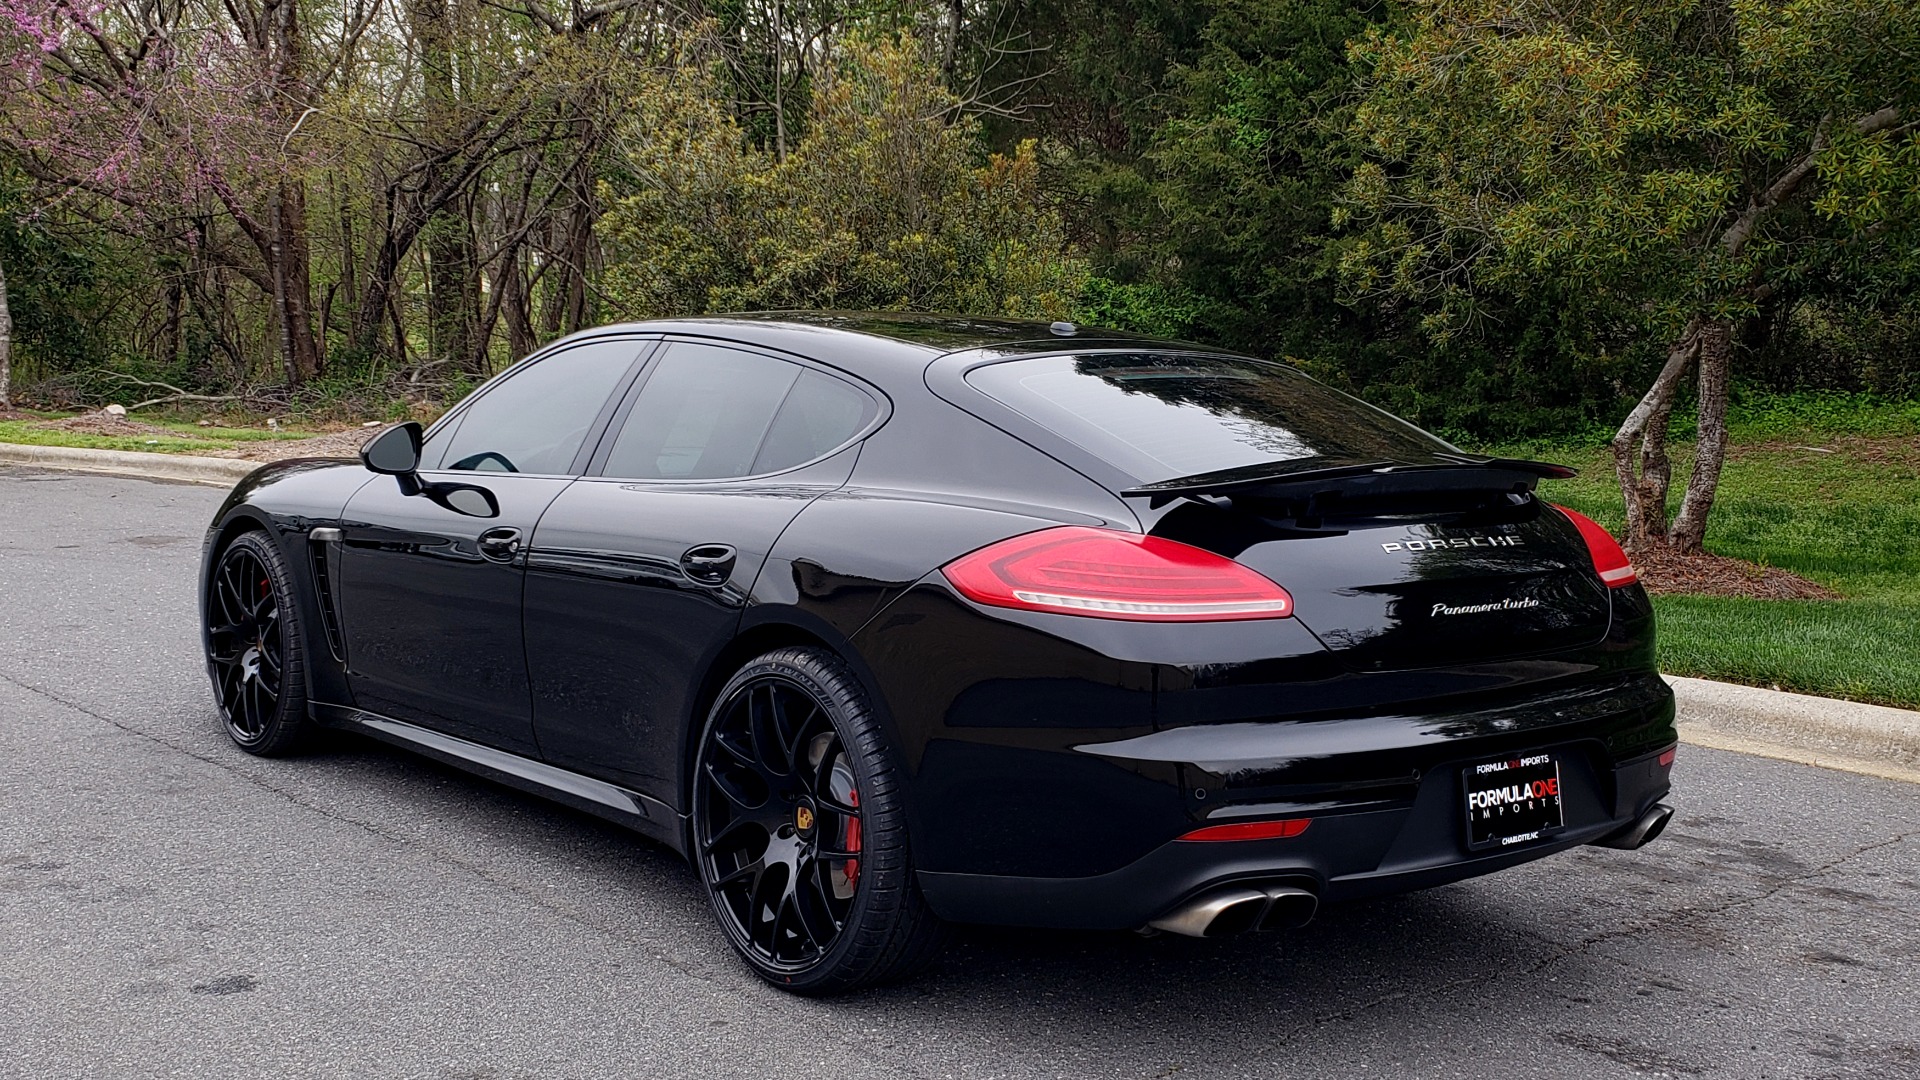 Used 2014 Porsche Panamera Turbo for sale Sold at Formula Imports in Charlotte NC 28227 3